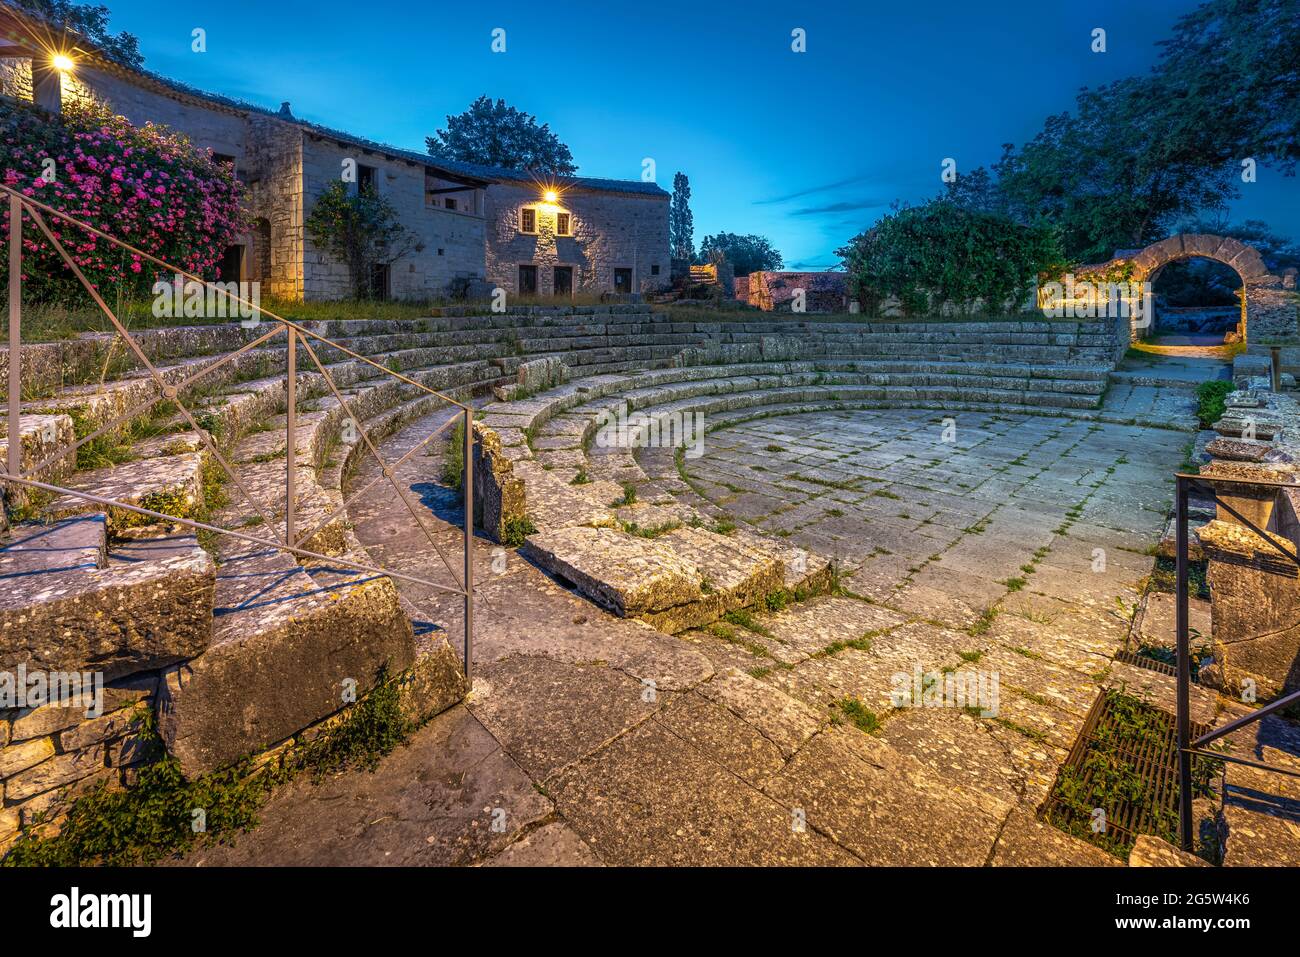 Roman theater in the ancient city of Altilia, today Sepino in Molise, at dusk in the Archaeological Park of Sepino. Sepino,Isernia, Molise, Italy Stock Photo